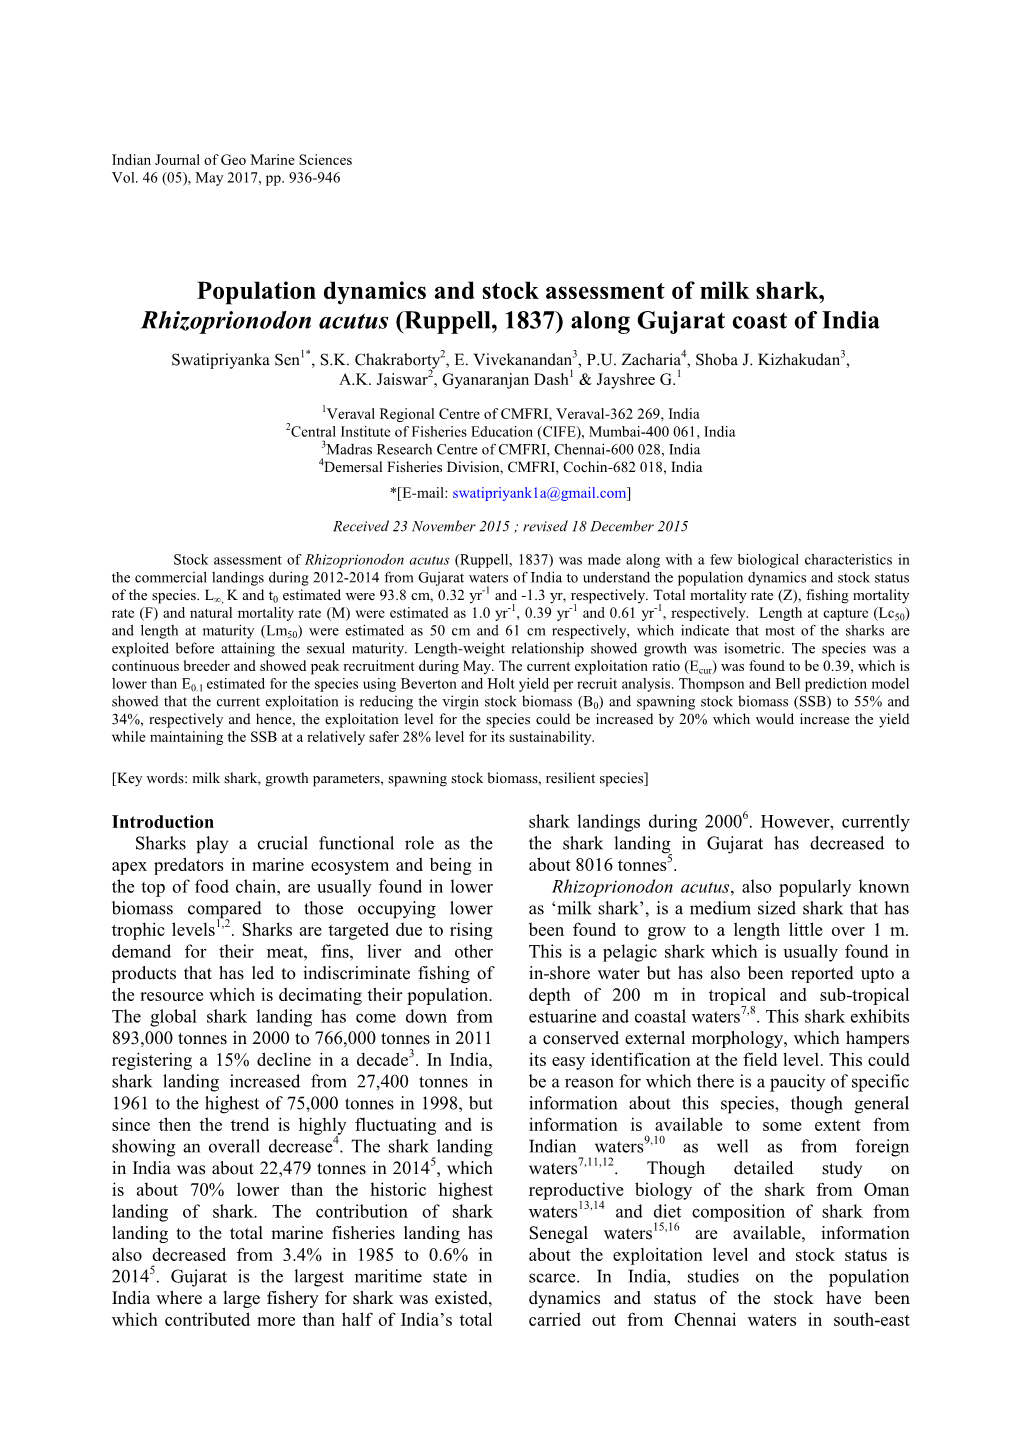 Population Dynamics and Stock Assessment of Milk Shark, Rhizoprionodon Acutus (Ruppell, 1837) Along Gujarat Coast of India